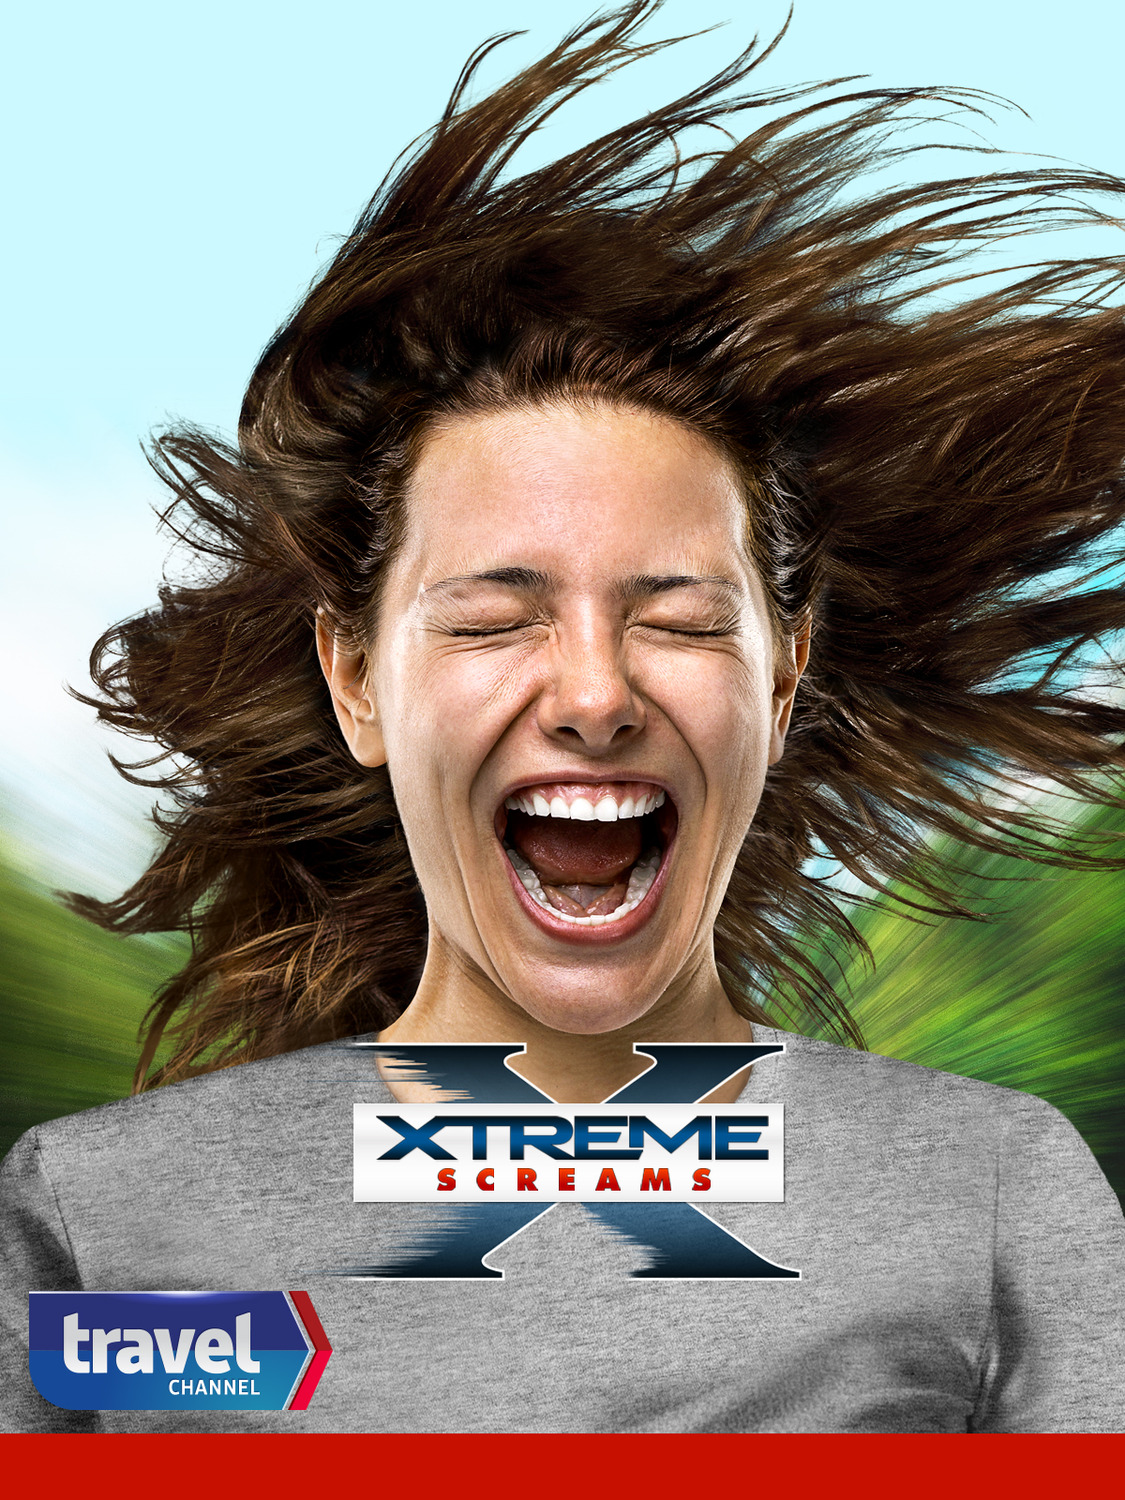 Extra Large TV Poster Image for Xtreme Screams 